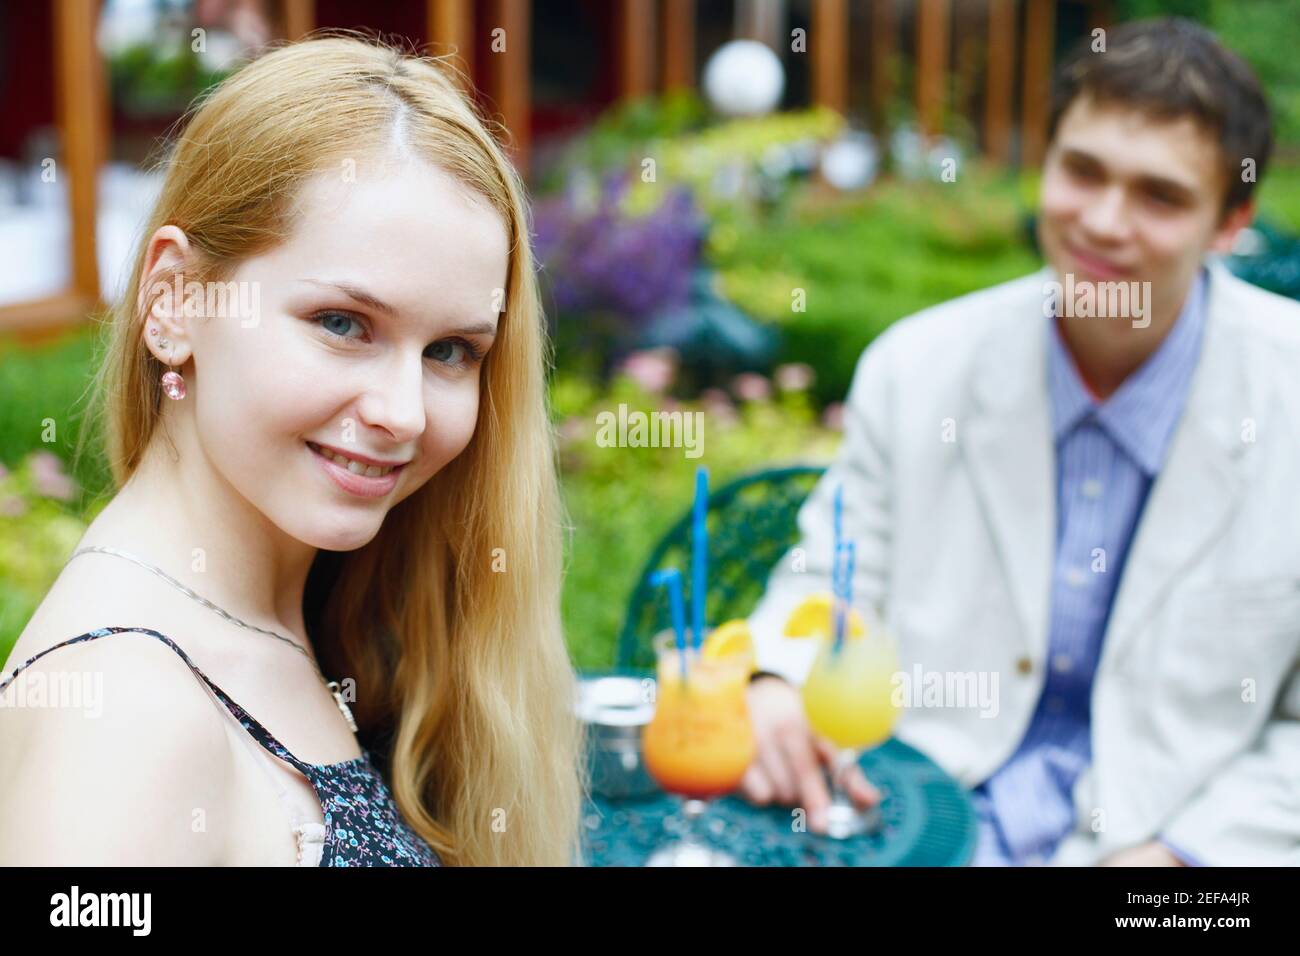 Portrait of a young woman smiling with a young man sitting with her Stock Photo